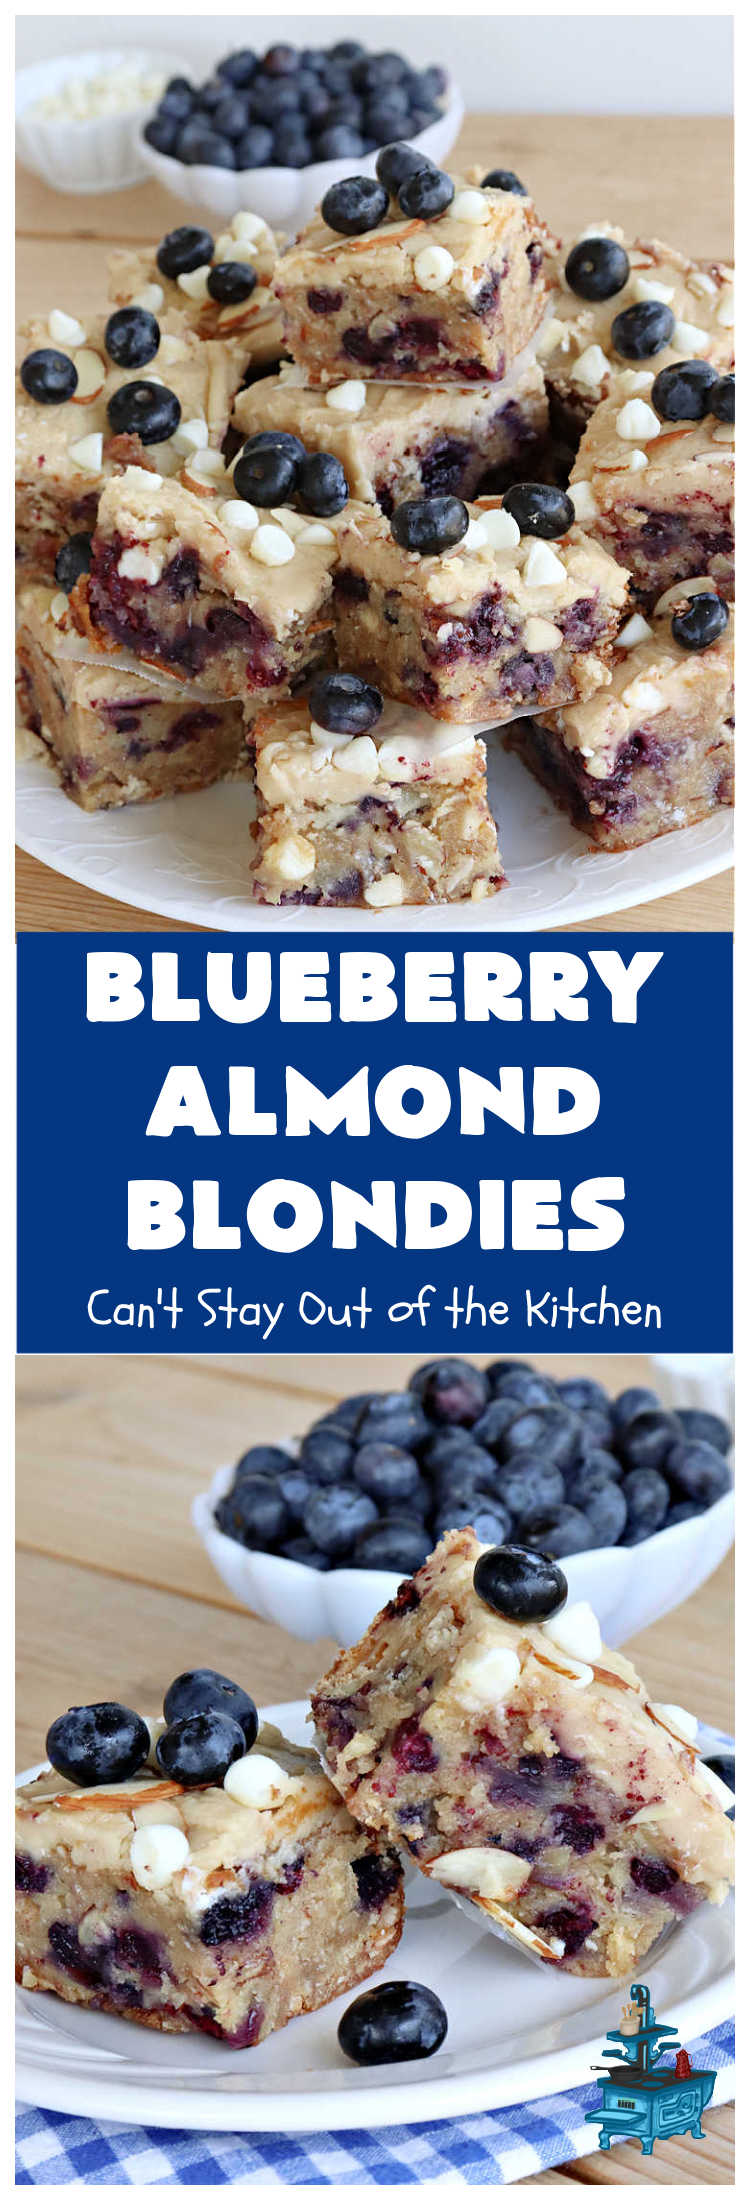 Blueberry Almond Blondies | Can't Stay Out of the Kitchen | these rich, decadent, drool-worthy #blondies will have you swooning from the first bite. They're filled with #blueberries, #almonds, #VanillaChips & made with #BrownedButter in the batter & the icing. Great for #tailgating parties, #BackyardBarbecue, or potlucks. Be prepared: these #cookies are addictive. You'll want more than one! #dessert #BlueberryAlmondBlondies